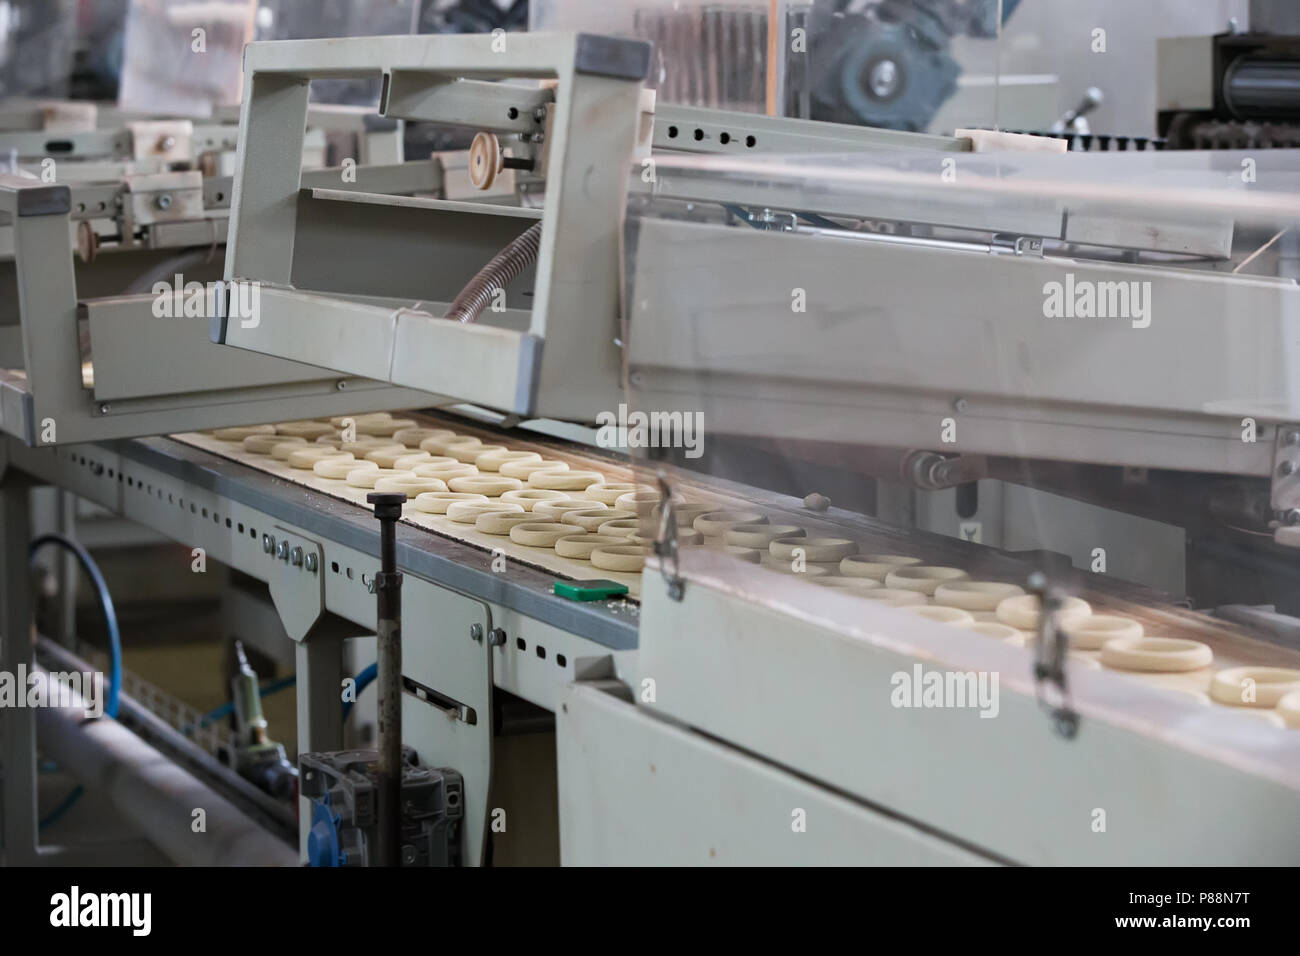 https://c8.alamy.com/comp/P88N7T/industrial-line-for-the-production-of-biscuits-and-bagelsthe-furnace-for-automatic-heating-of-cookies-P88N7T.jpg